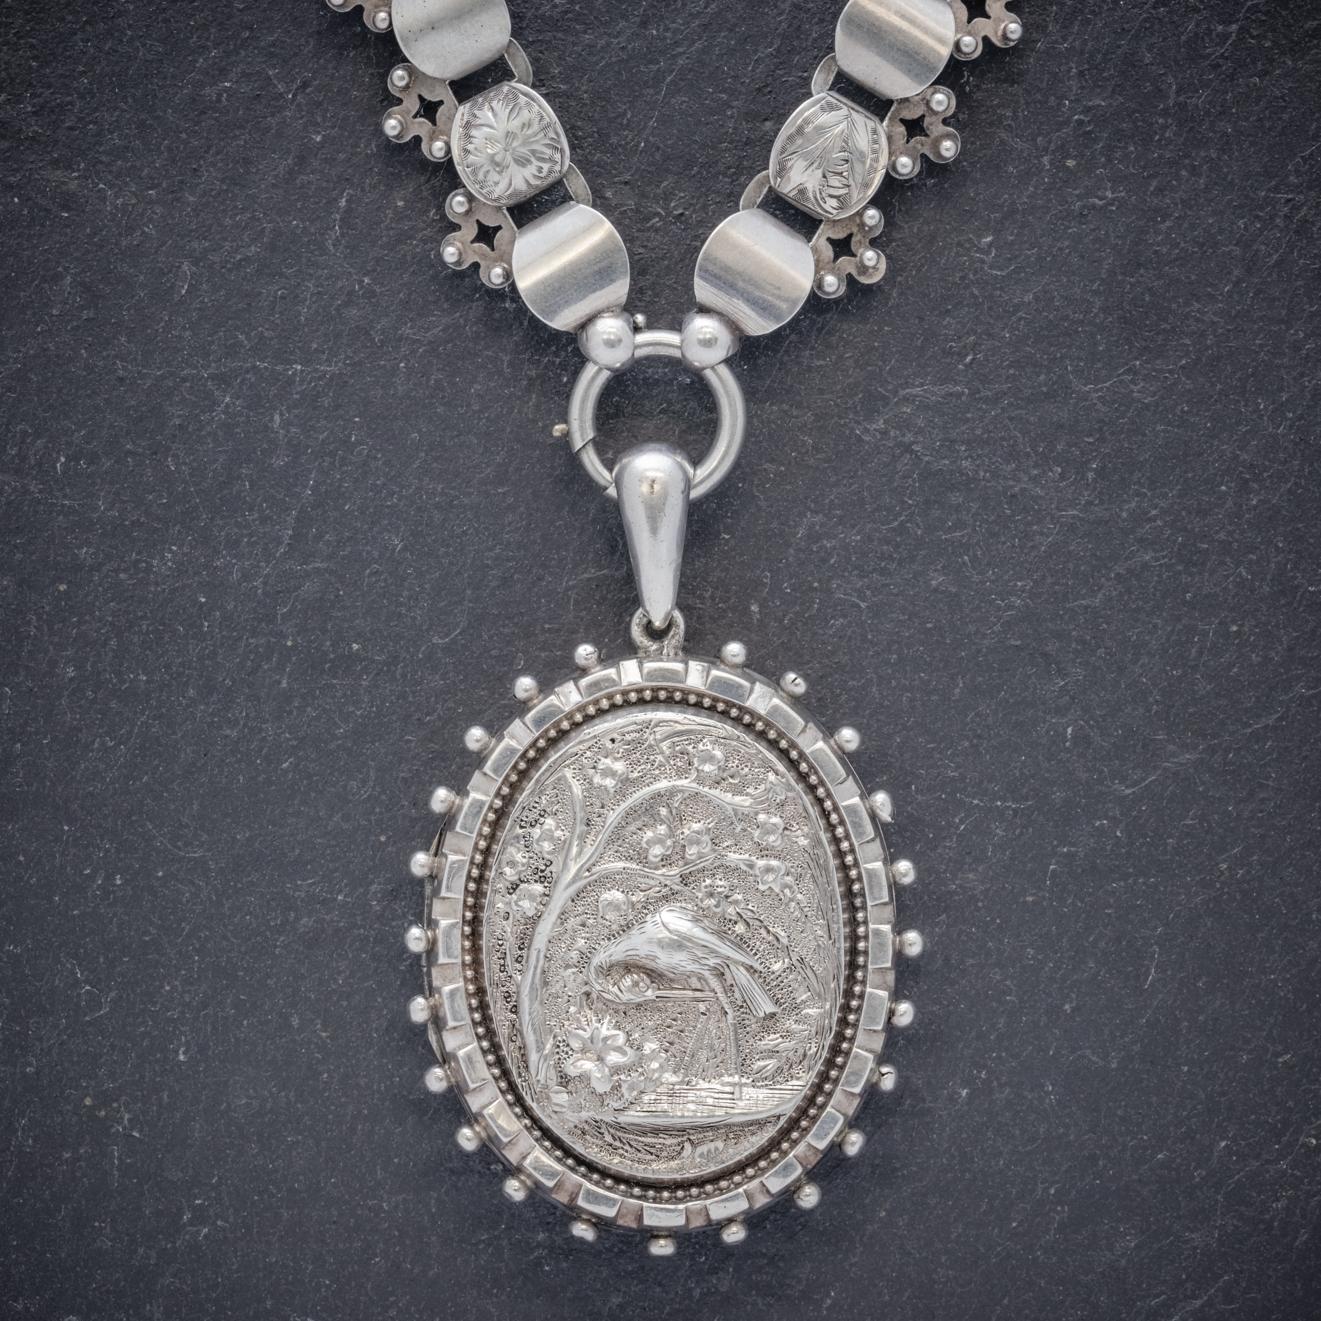 A wonderful antique Victorian collar featuring a large Sterling Silver Locket engraved with a lovely high relief image of a stork standing in a river under a tree. 

The locket is bordered by a frame of Silver balls and opens up so that two